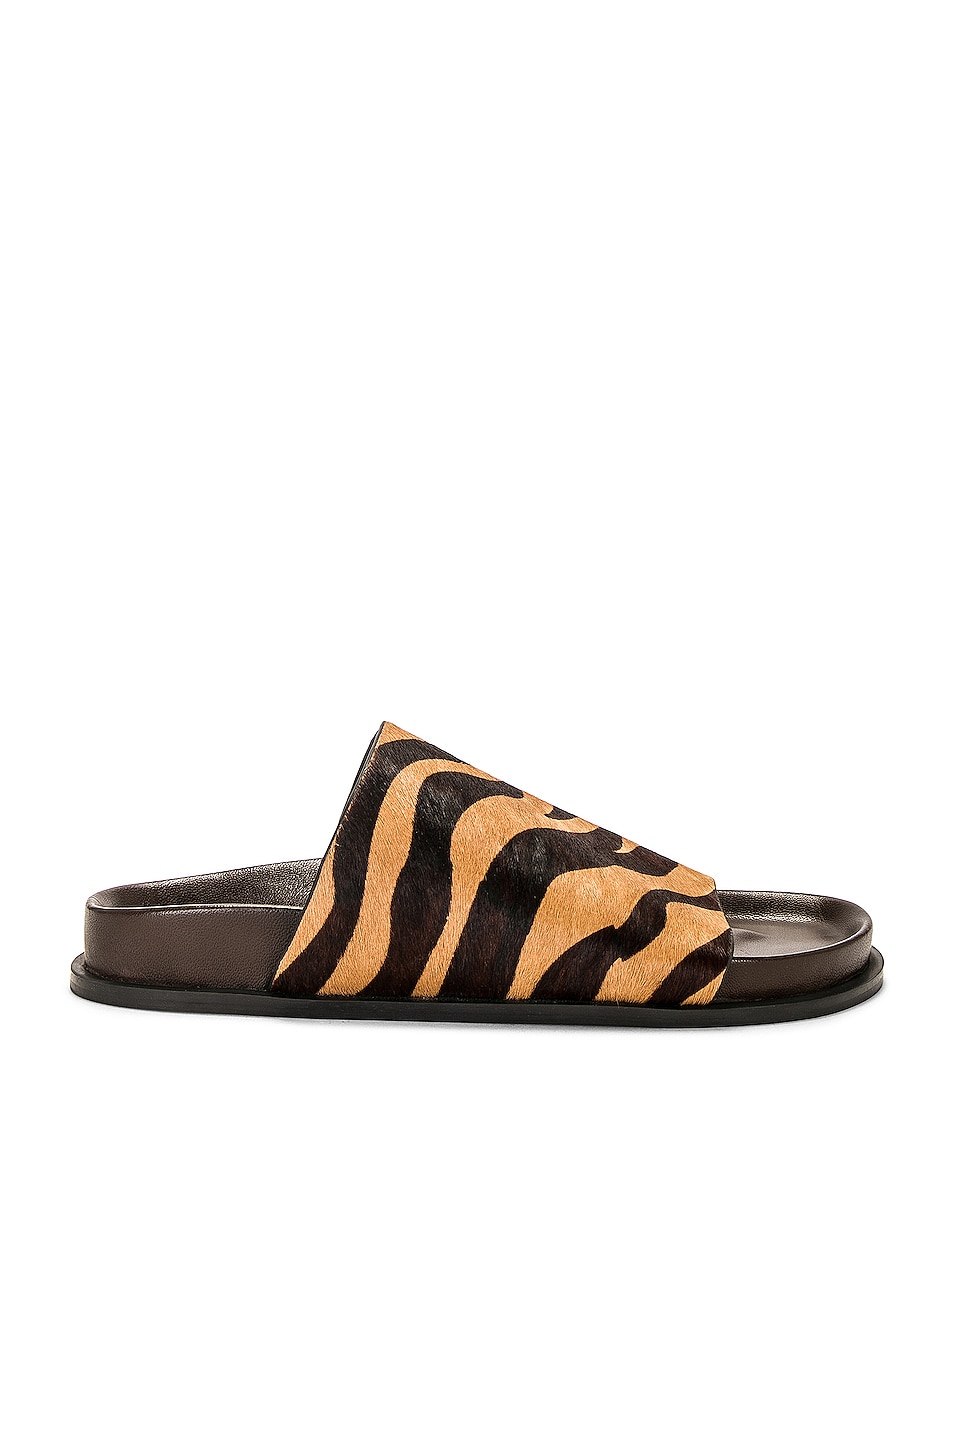 Image 1 of A.EMERY Luca Sandal in Animal